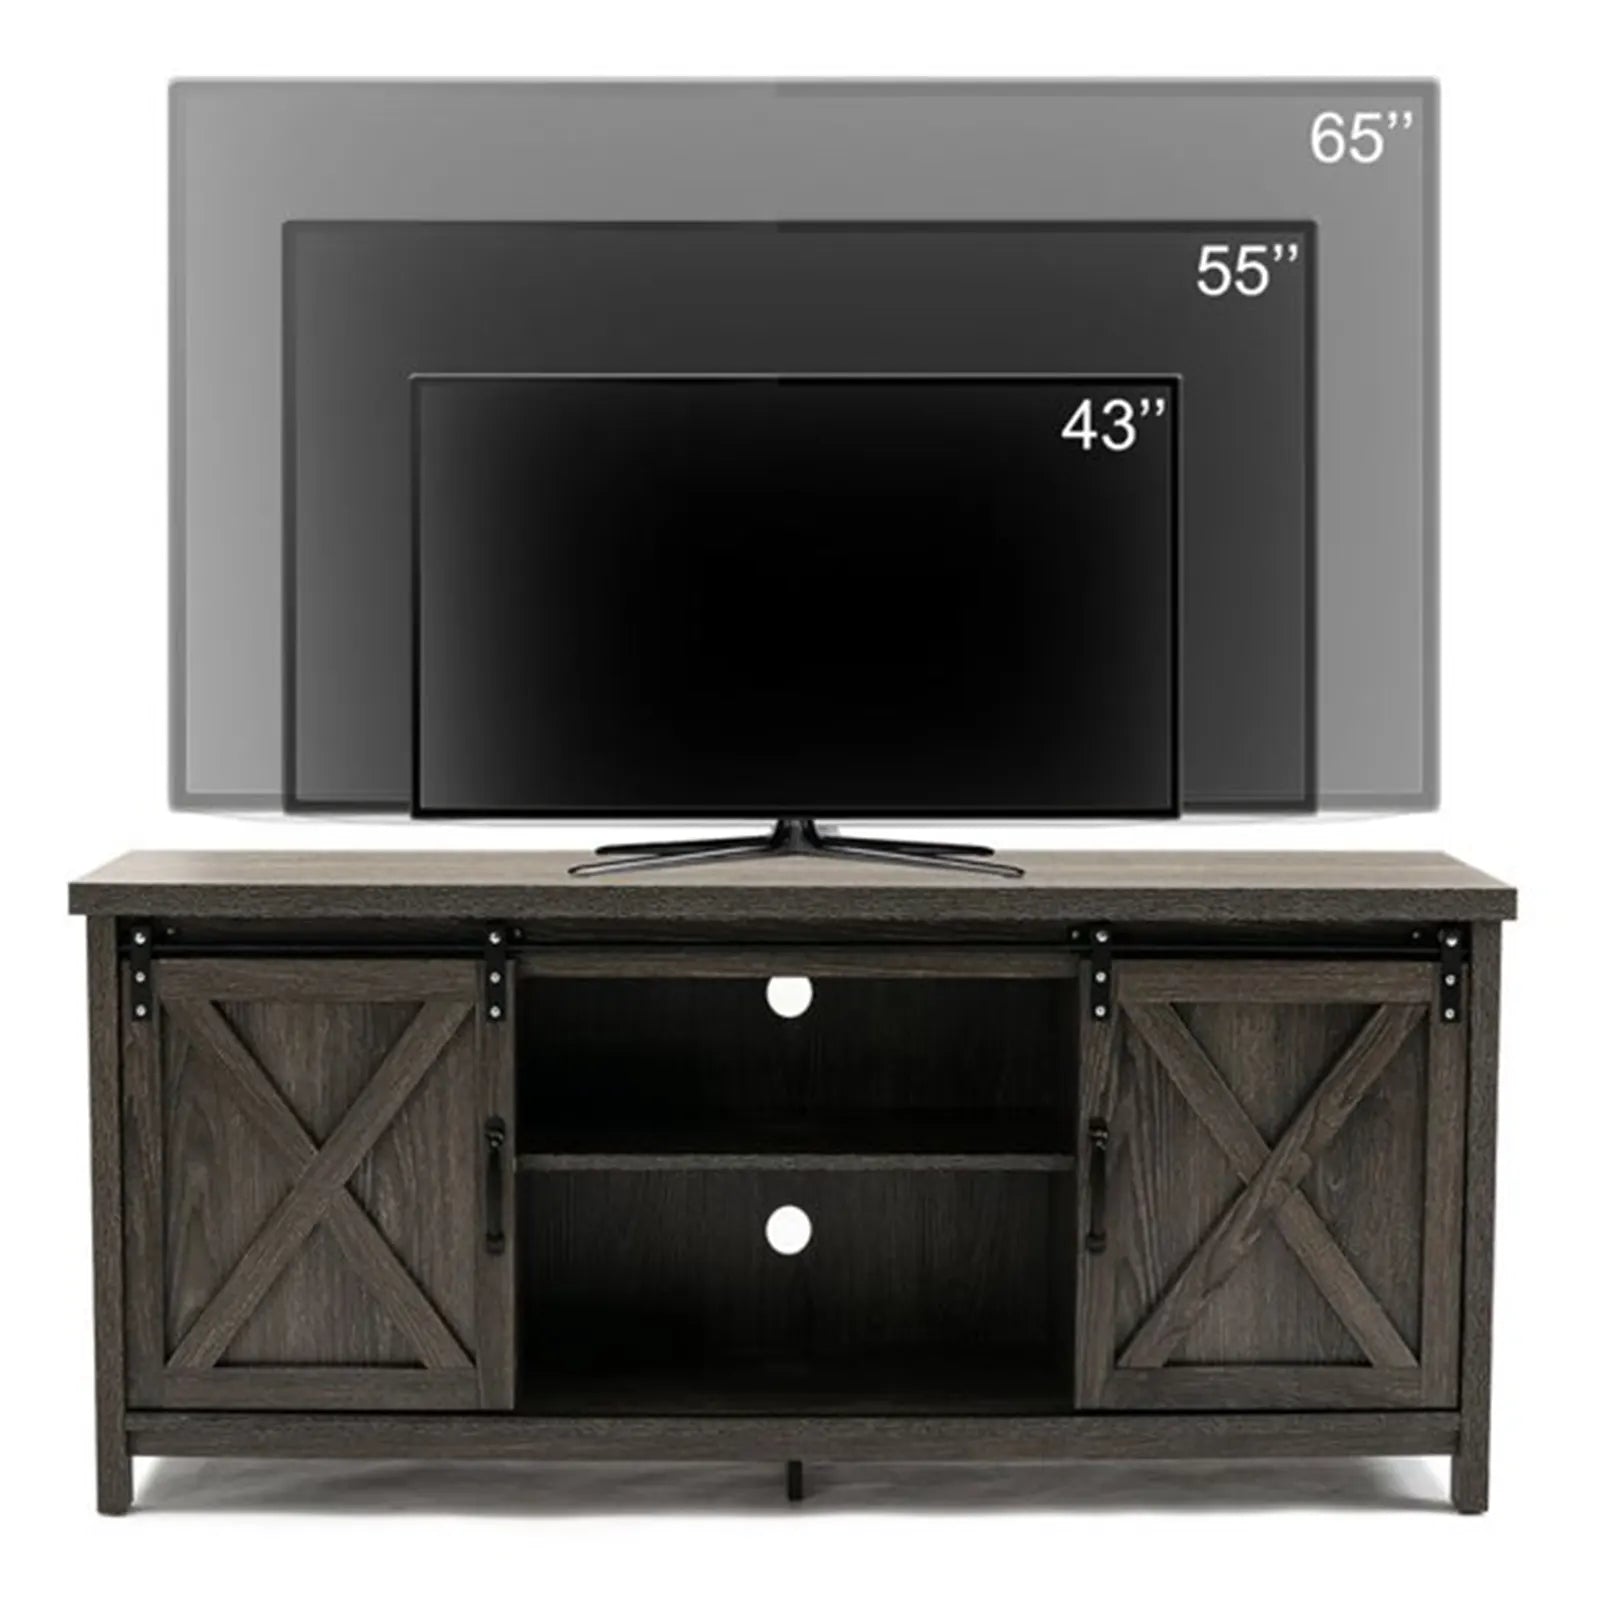 58" Farmhouse Sliding Barn Door TV Stand for TVs Up to 65" Television Cabinet